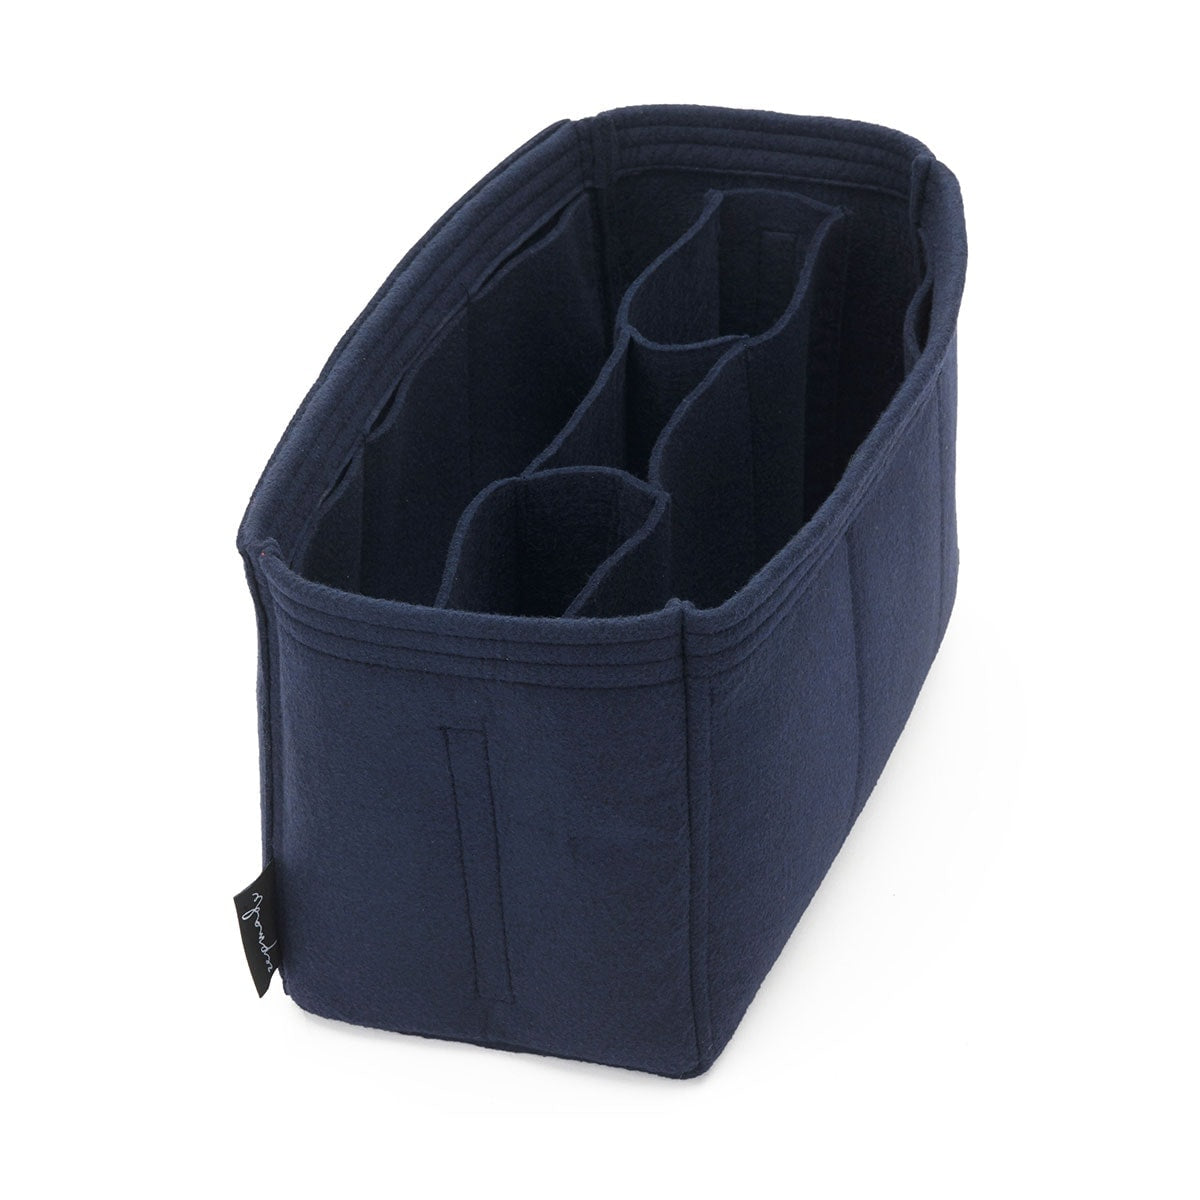 All-in-One style felt bag organizer compatible for Artsy MM and Artsy GM